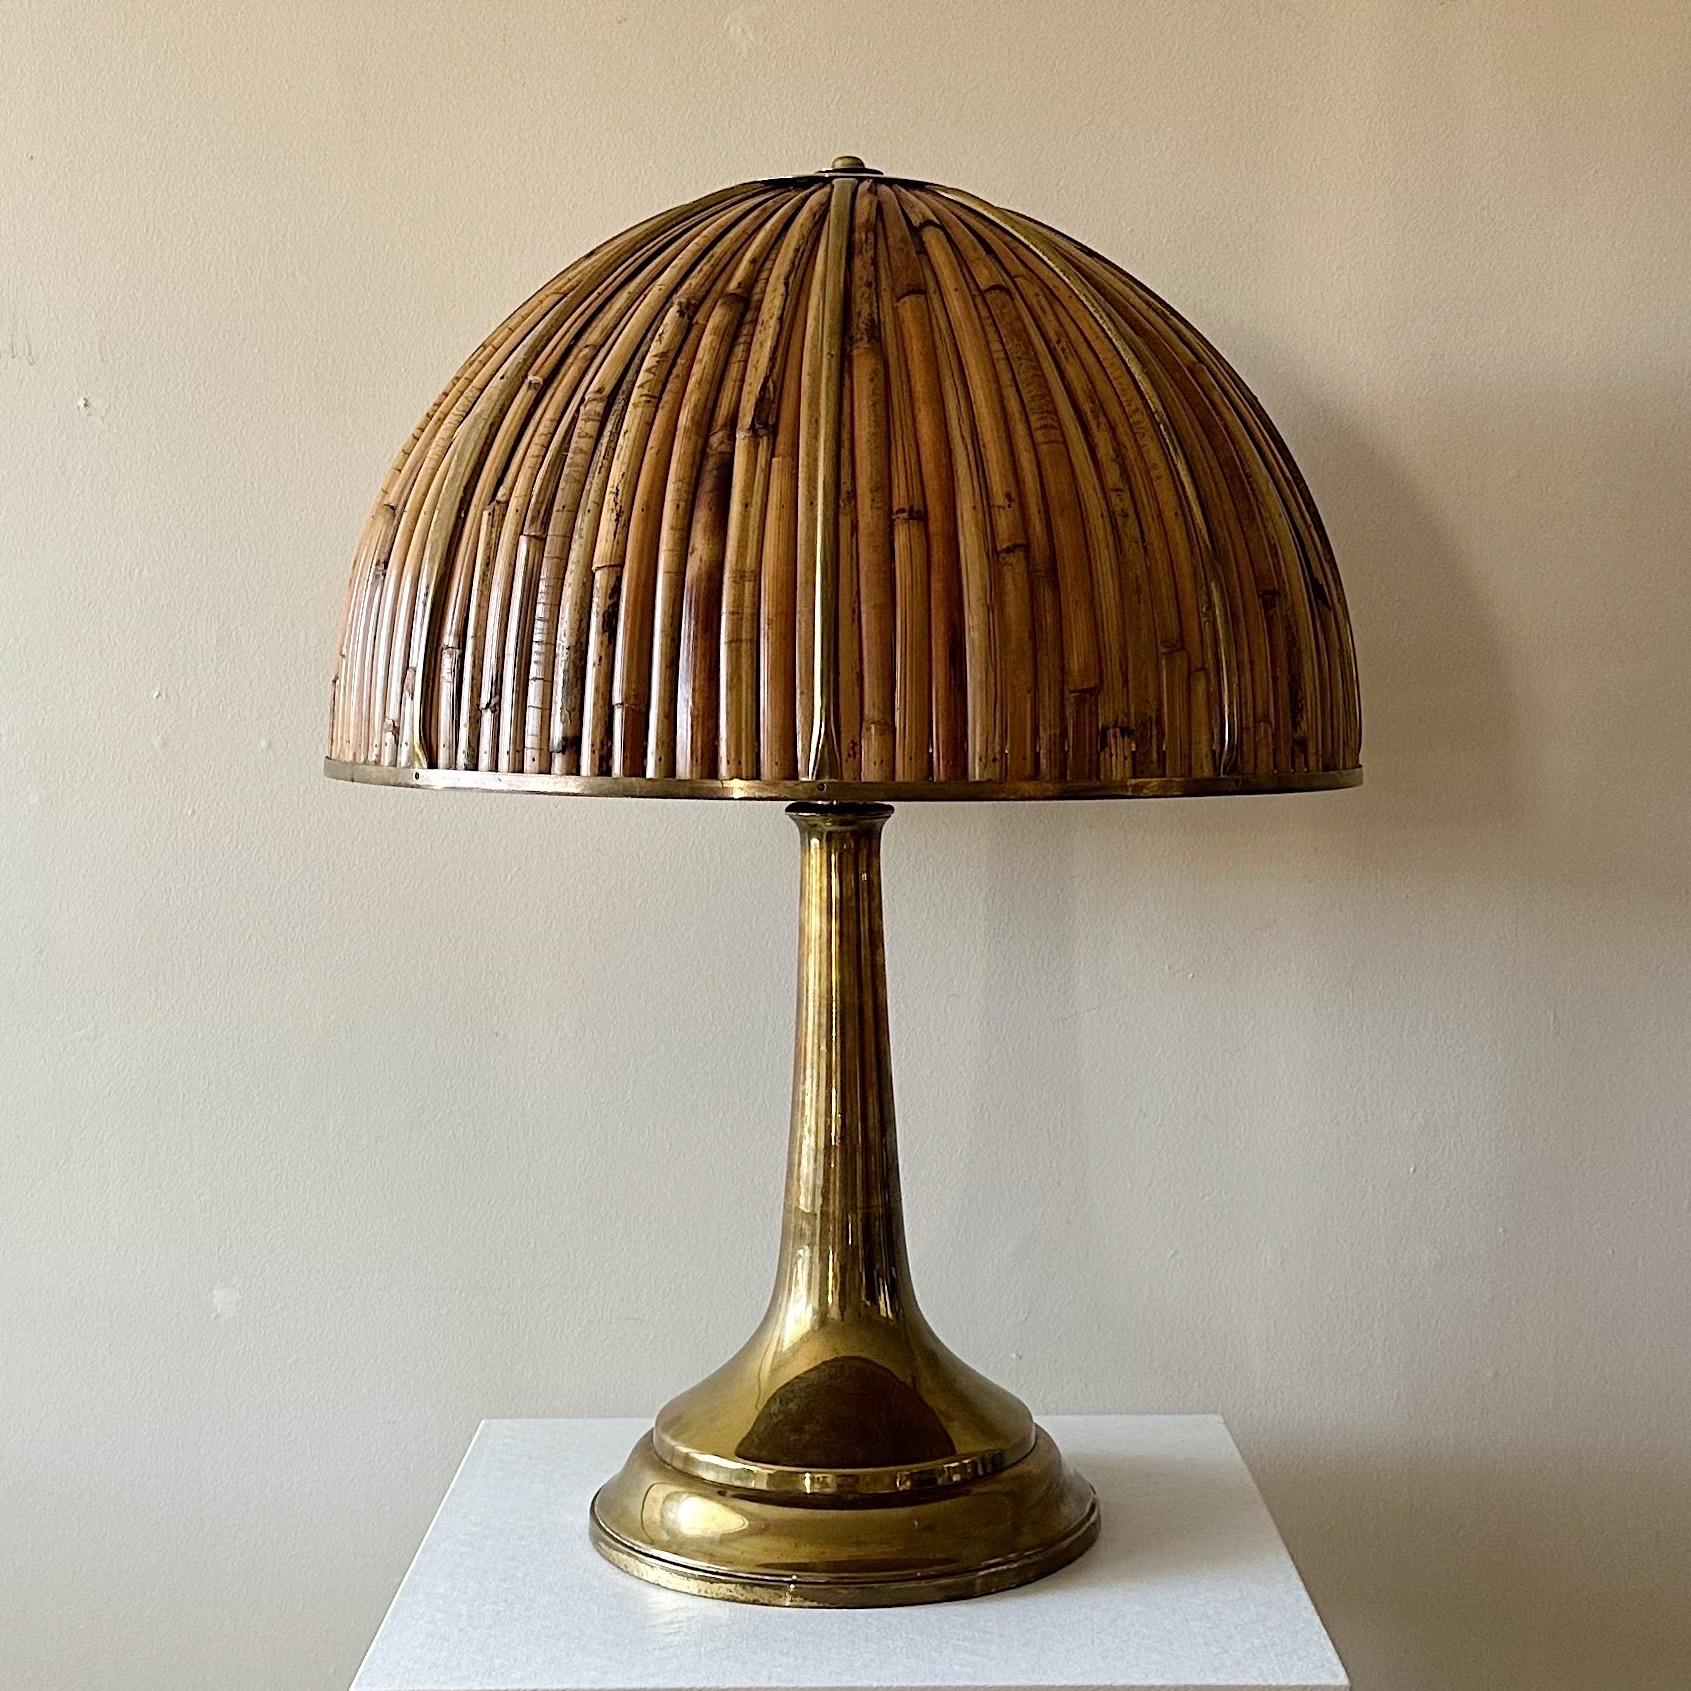 Gabriella Crespi Large Fungo Table Lamp, Rising Sun Series, 1973, Italy. This is the larger 